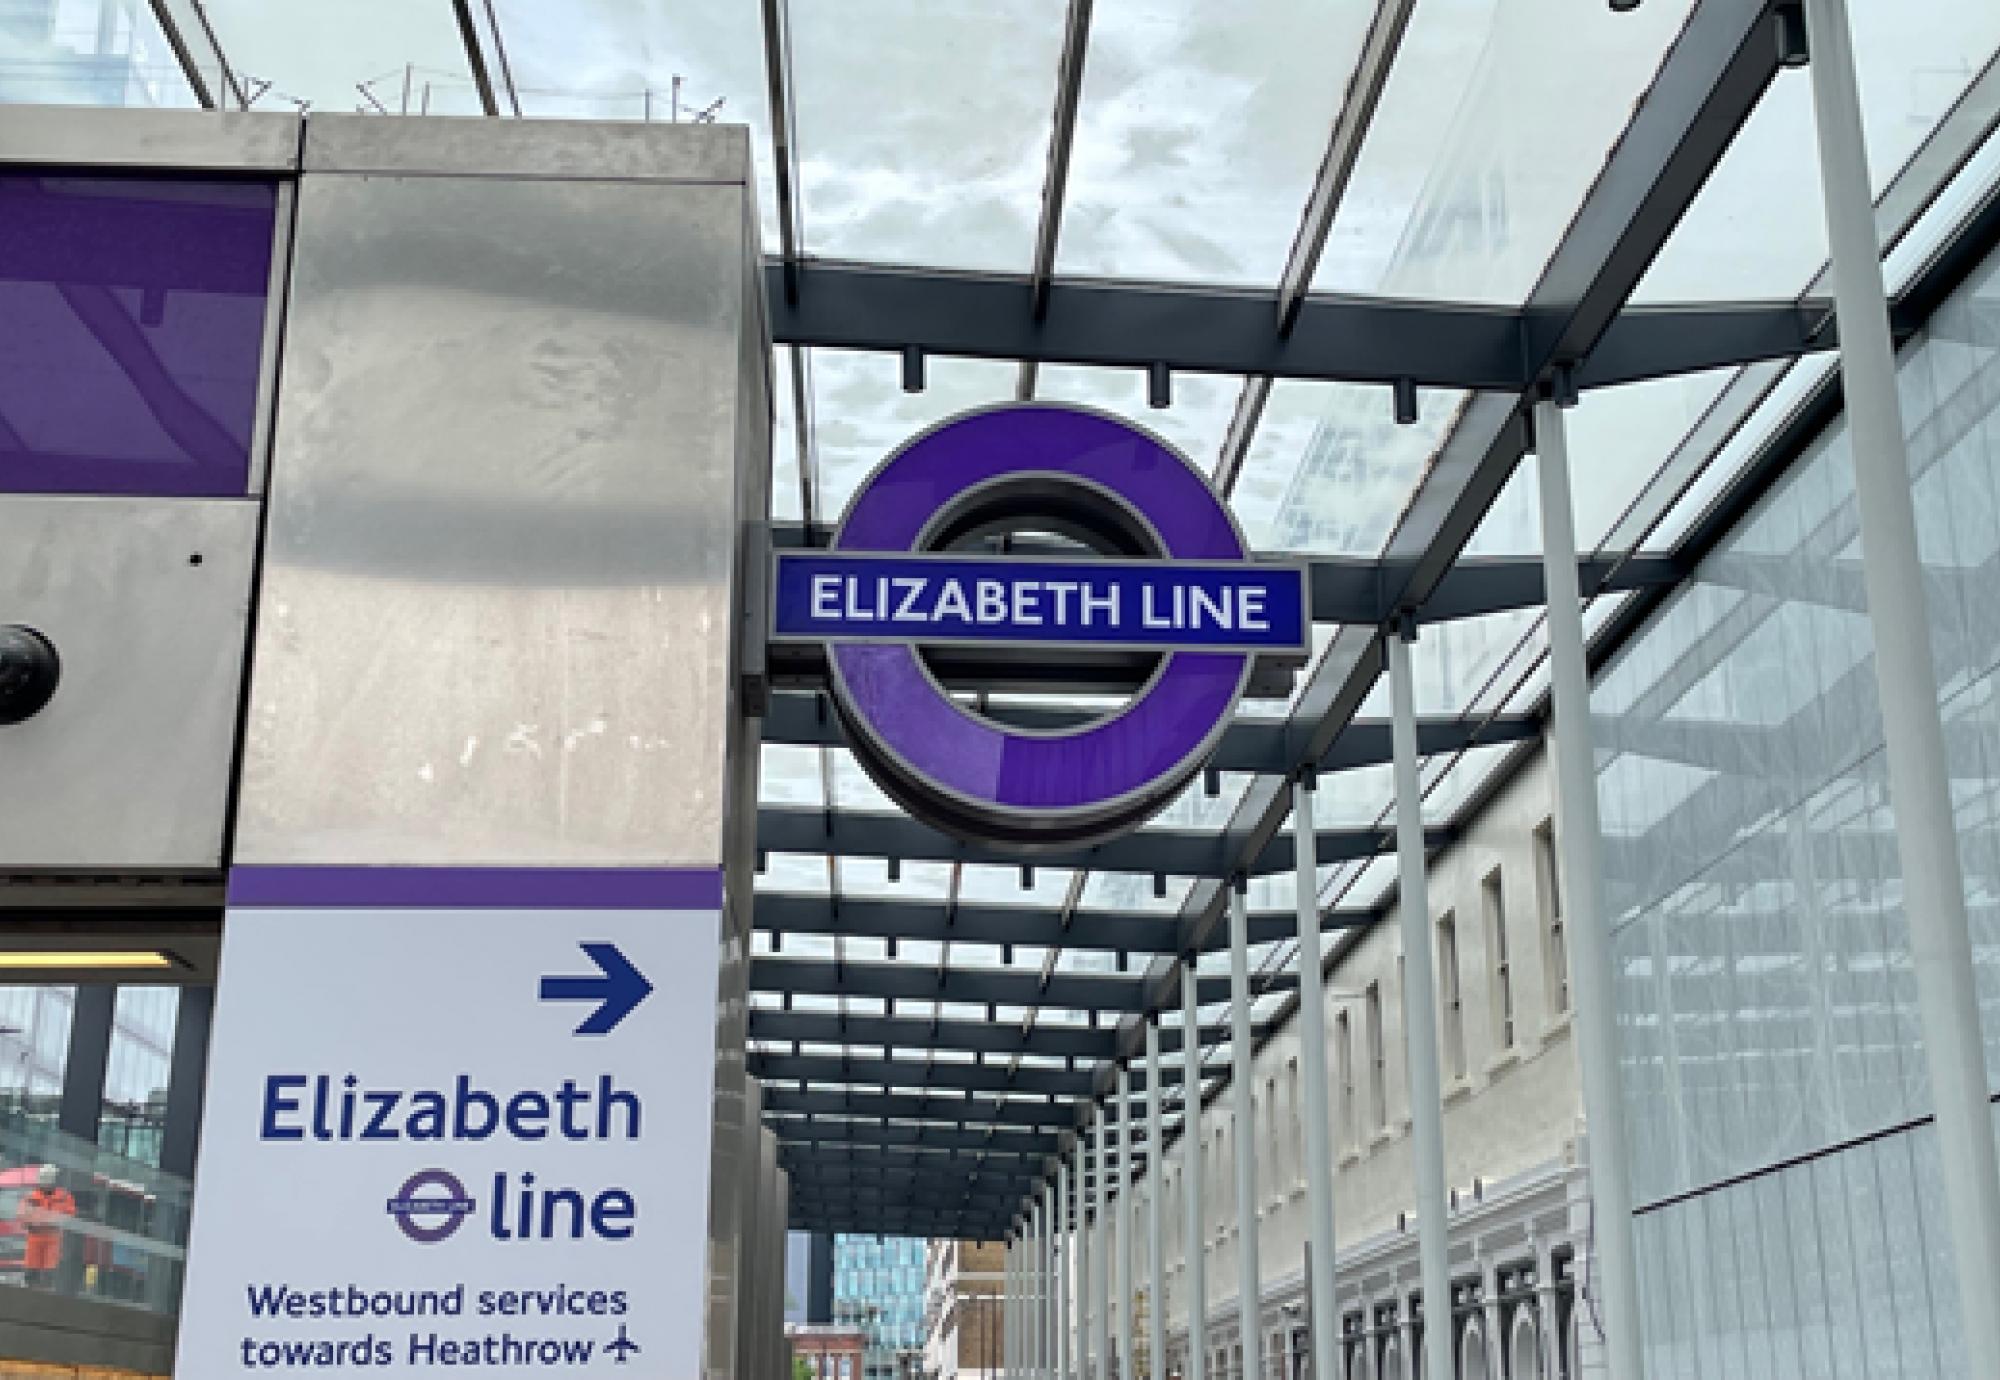 Elizabeth line officially opens to public | Rail News